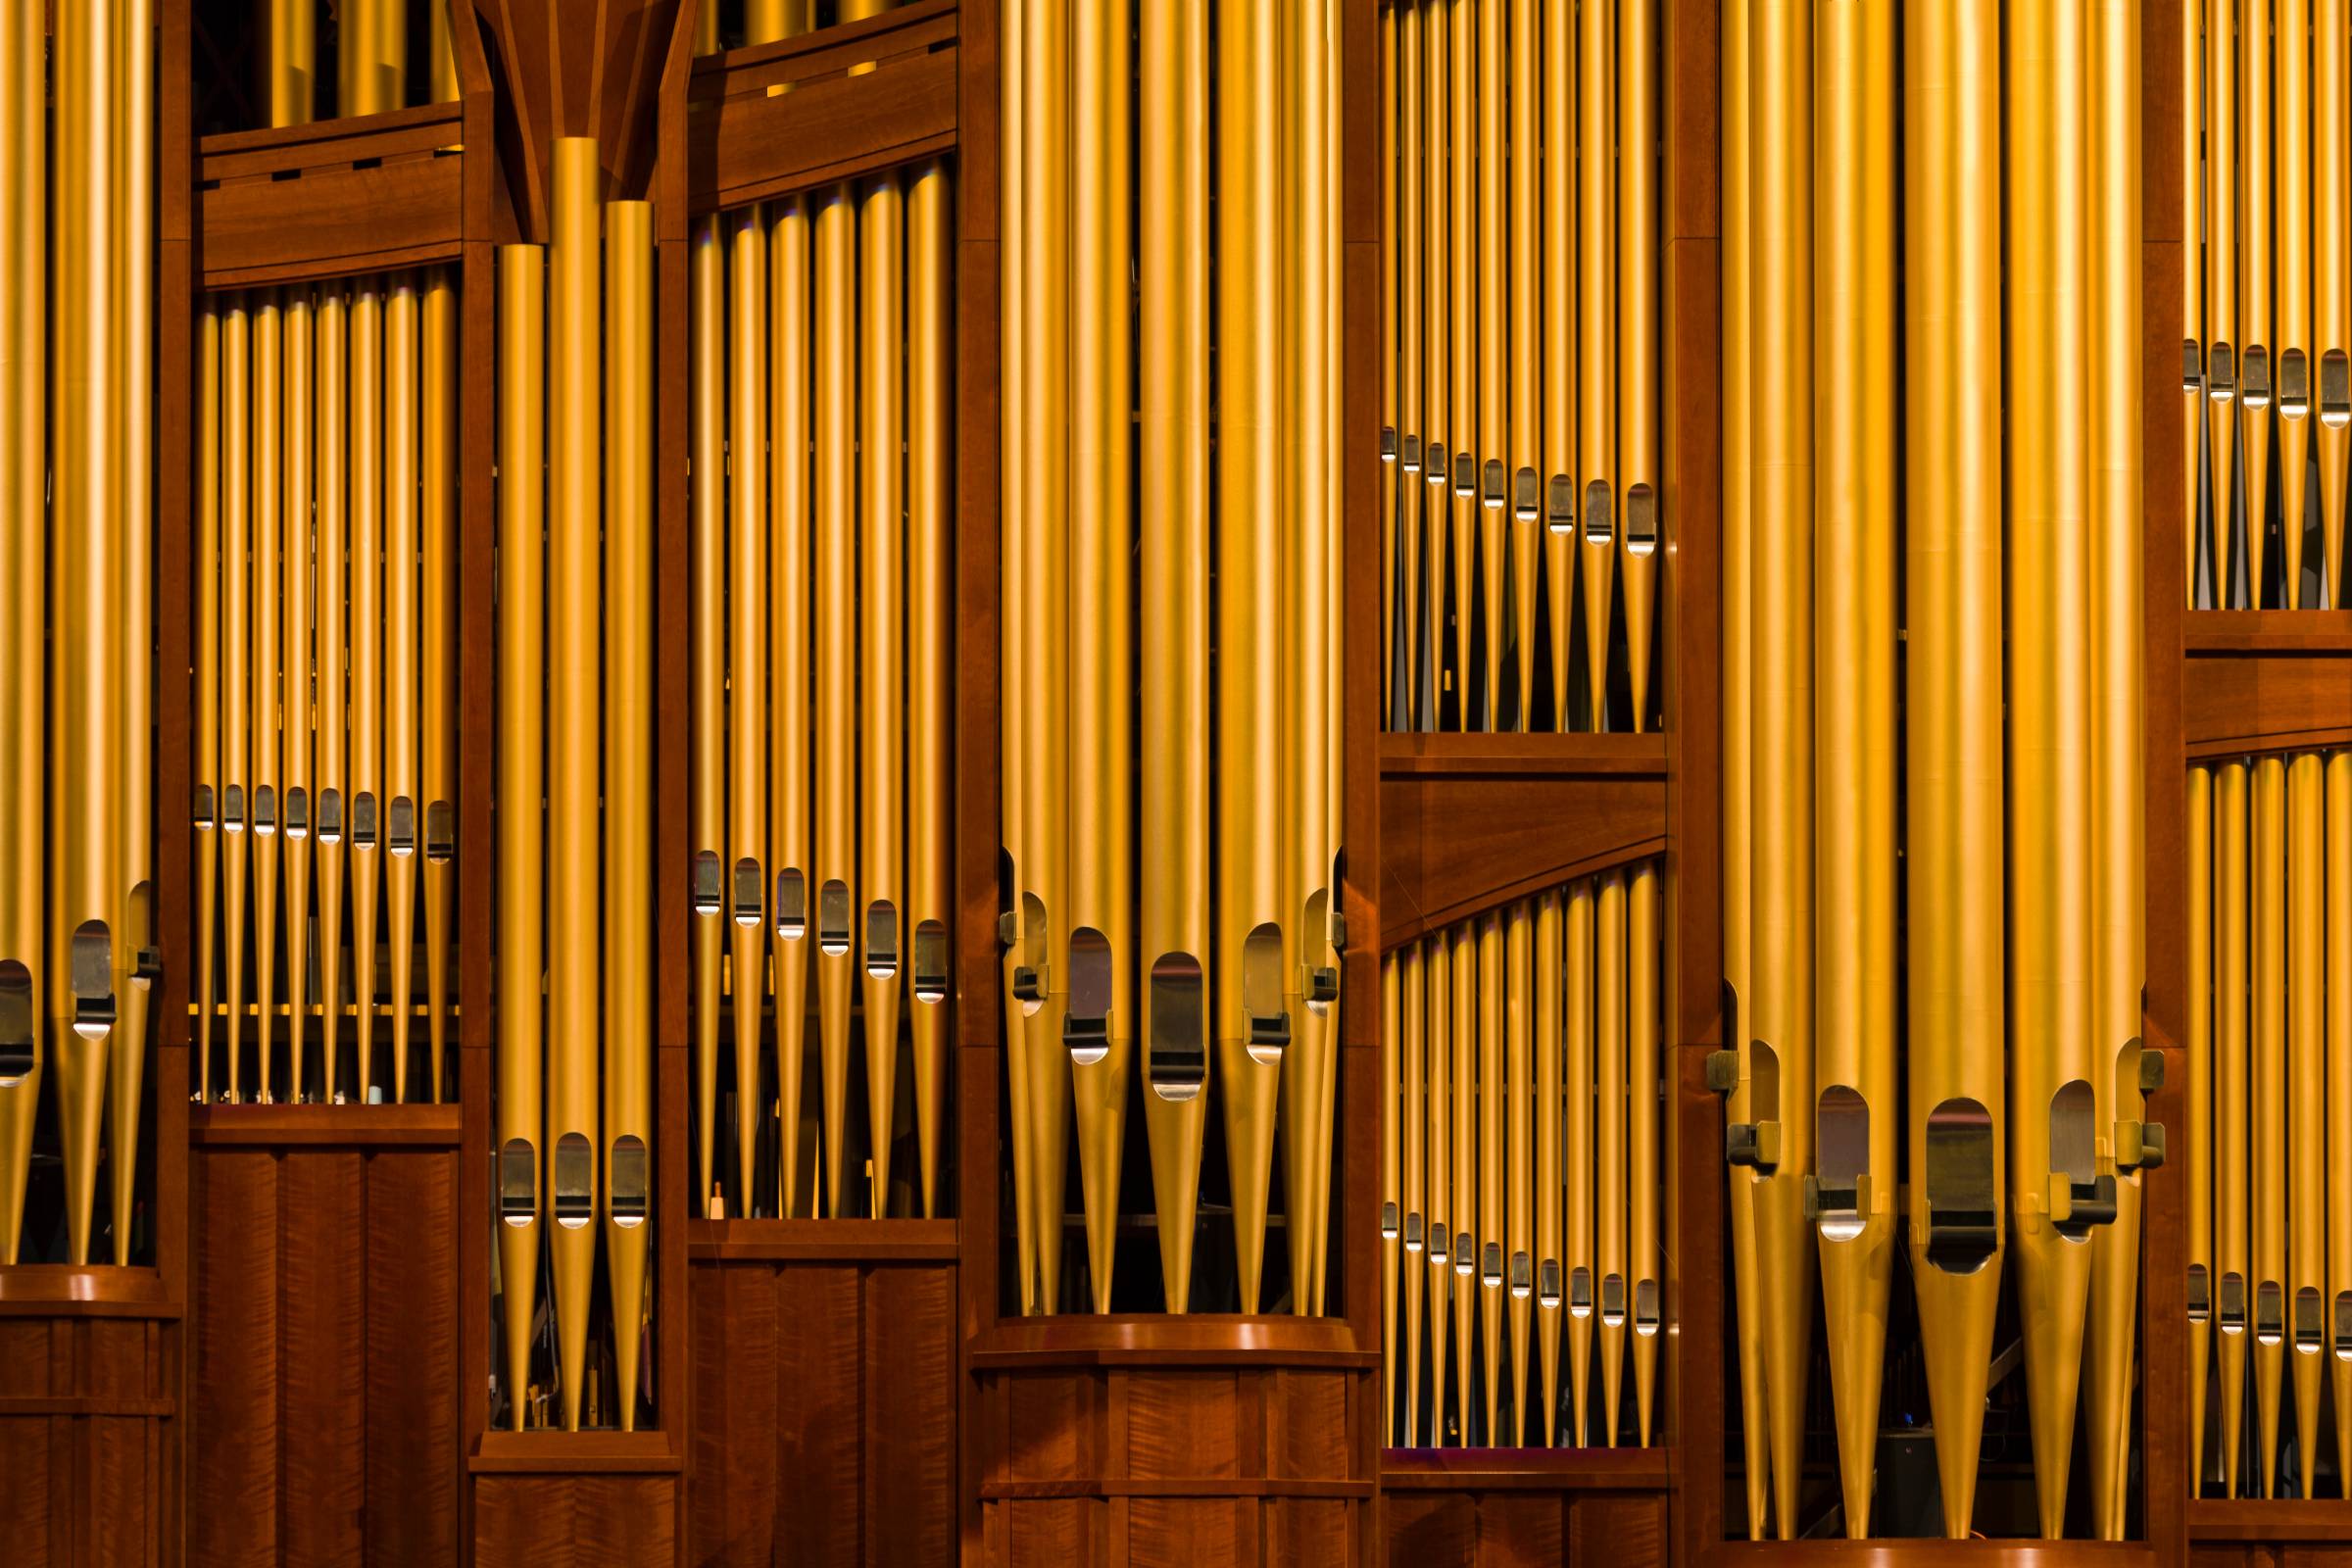 Conference Center Organ Pipes